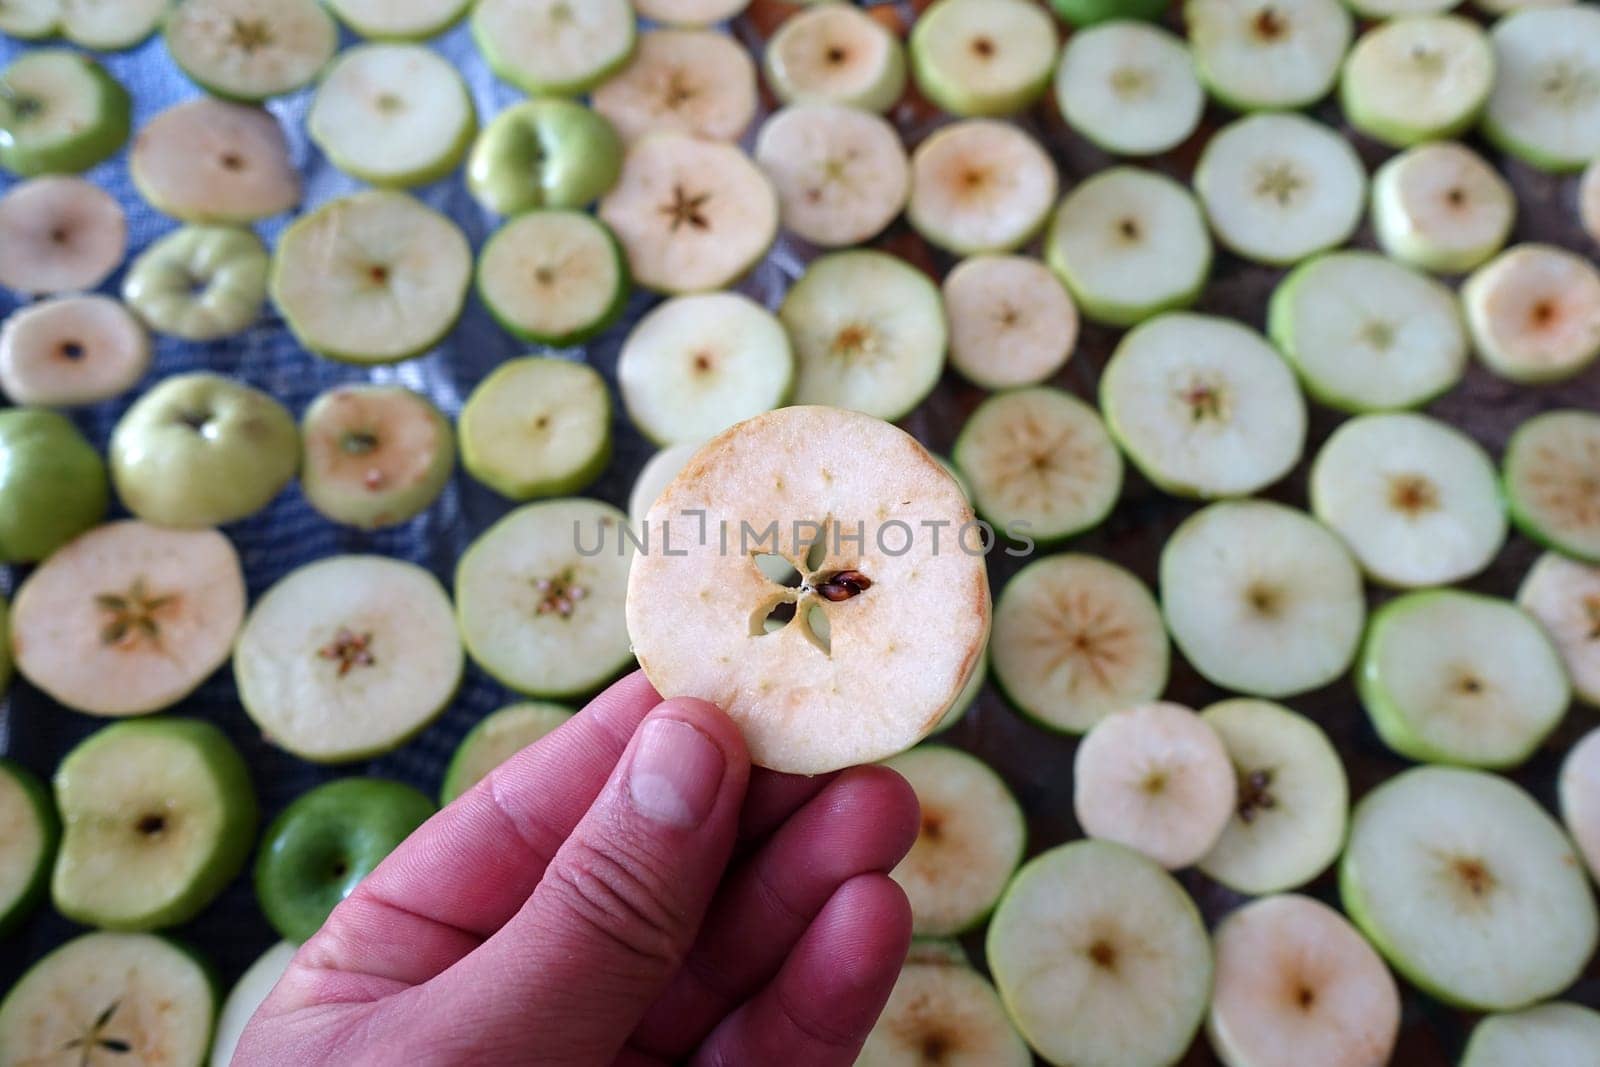 drying homemade apples, drying apples, sliced apple slices left to dry, by nhatipoglu